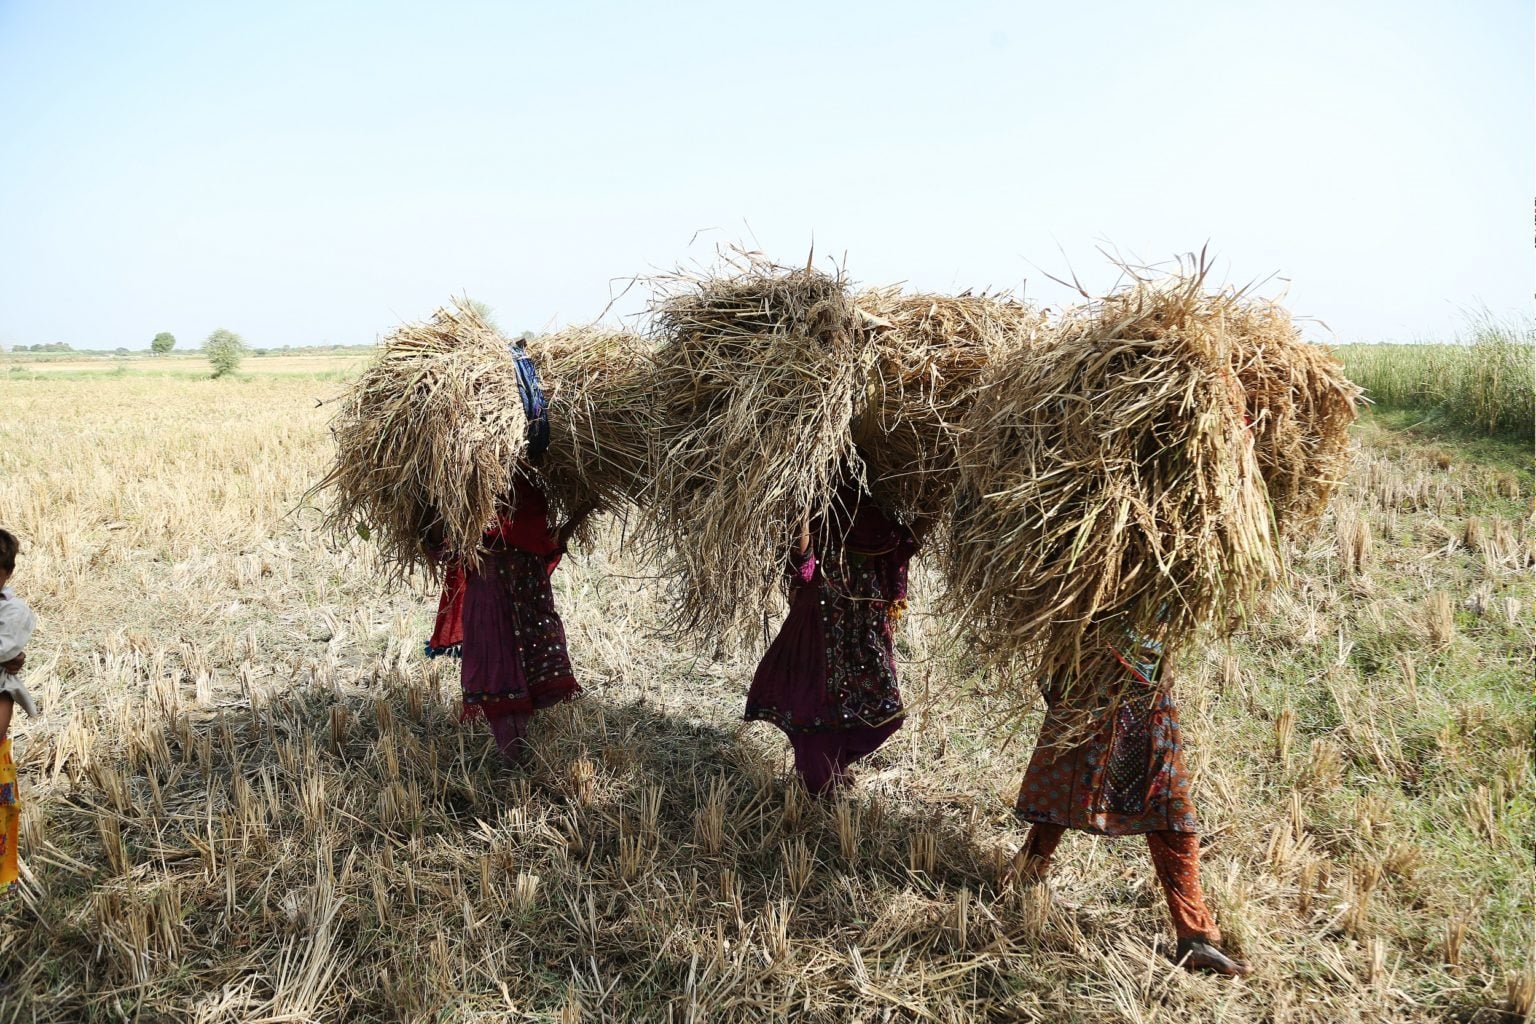 Landless women farmers collecting rice straw from field areas, near village Khan Muhammad Panhwar, district Hyderabad. — Photo by Manoj Genani